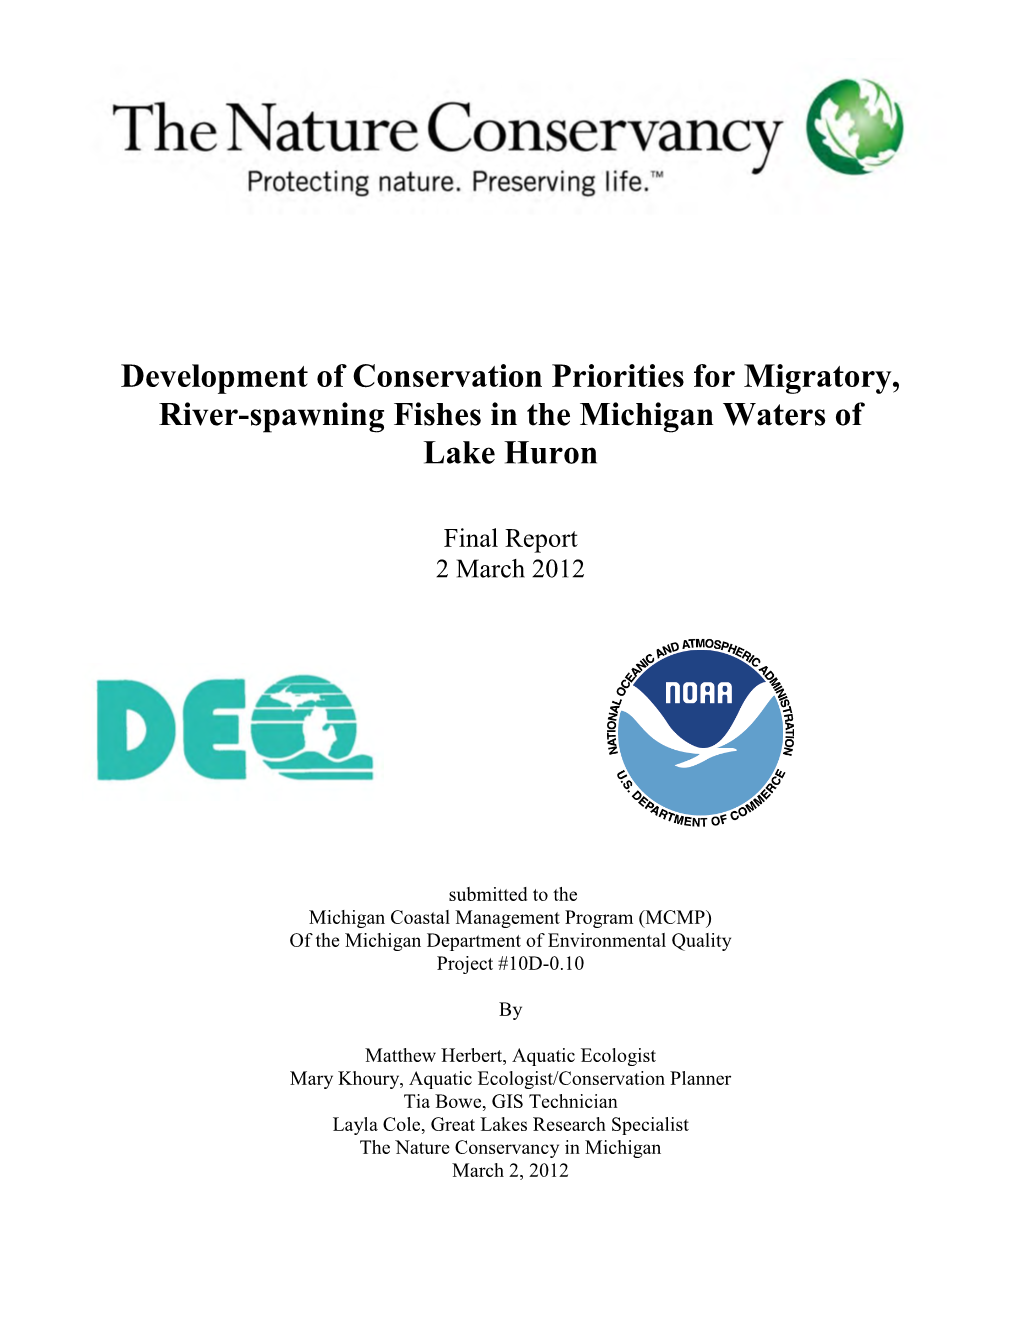 TNC Conservation Priorities for Migratory Spawning Fishes